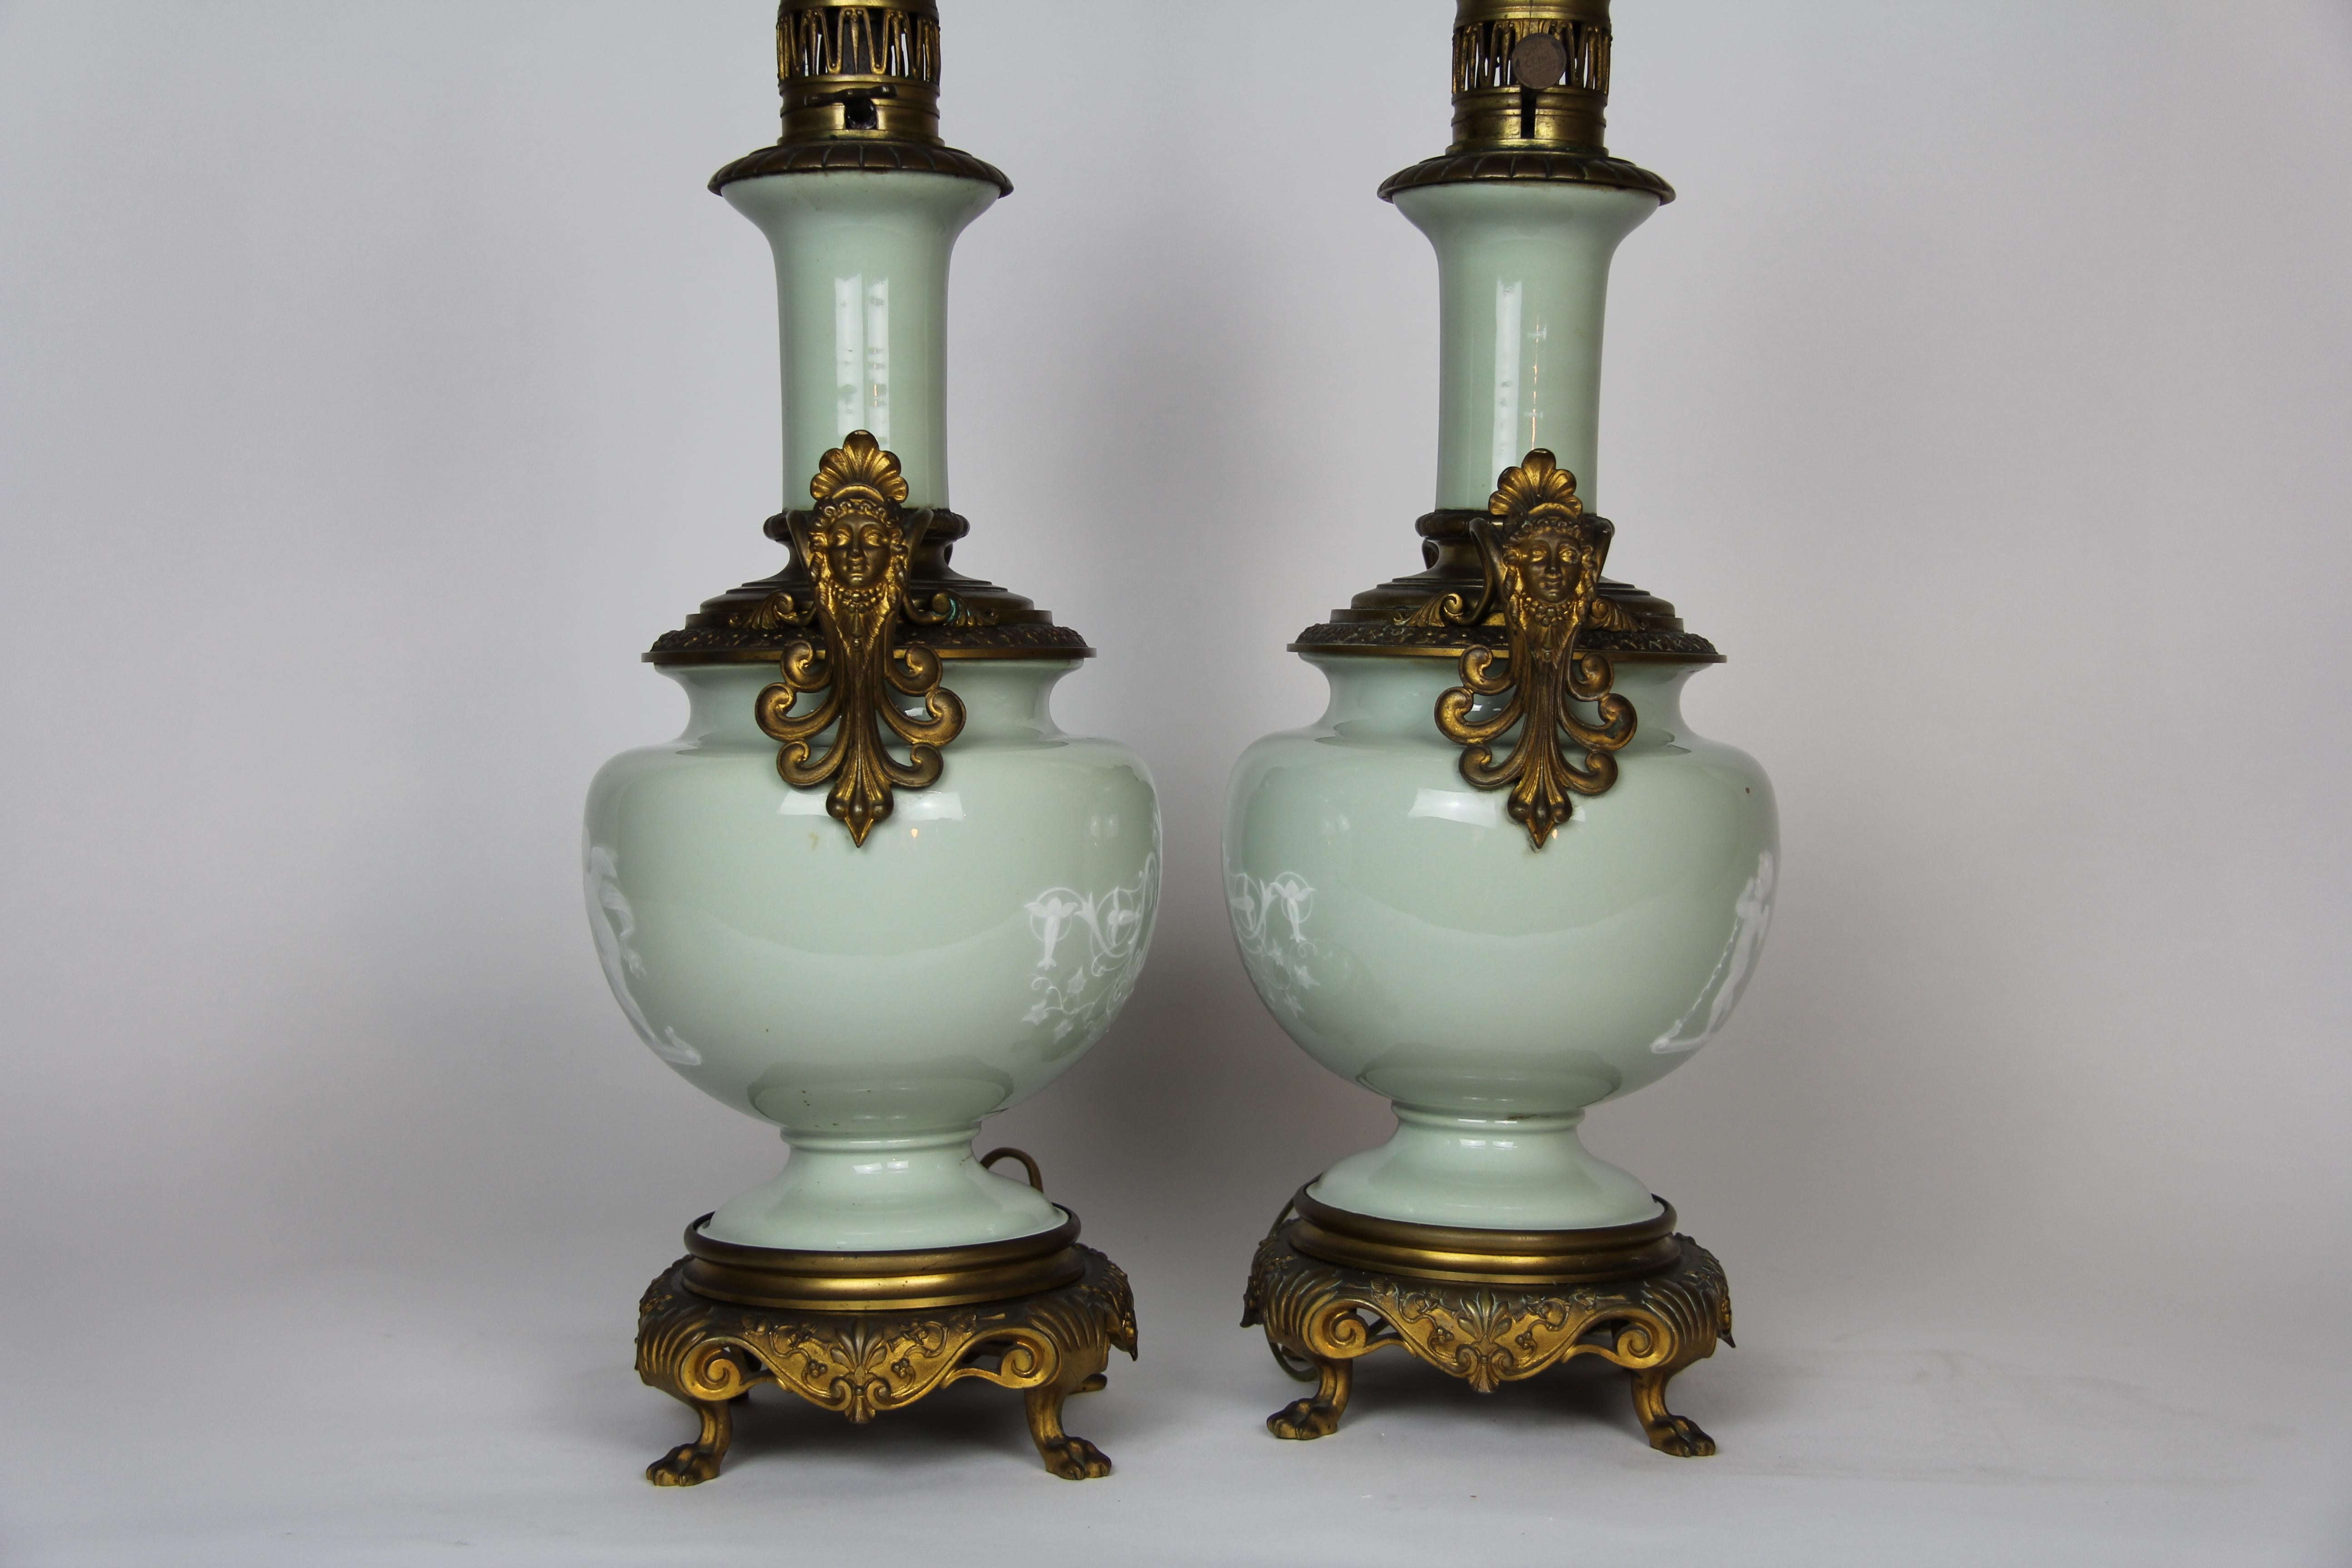 French Gilt Bronze Mounted Double-Sided Pate Sur Pate Celadon Ground Lamps, Pair For Sale 6